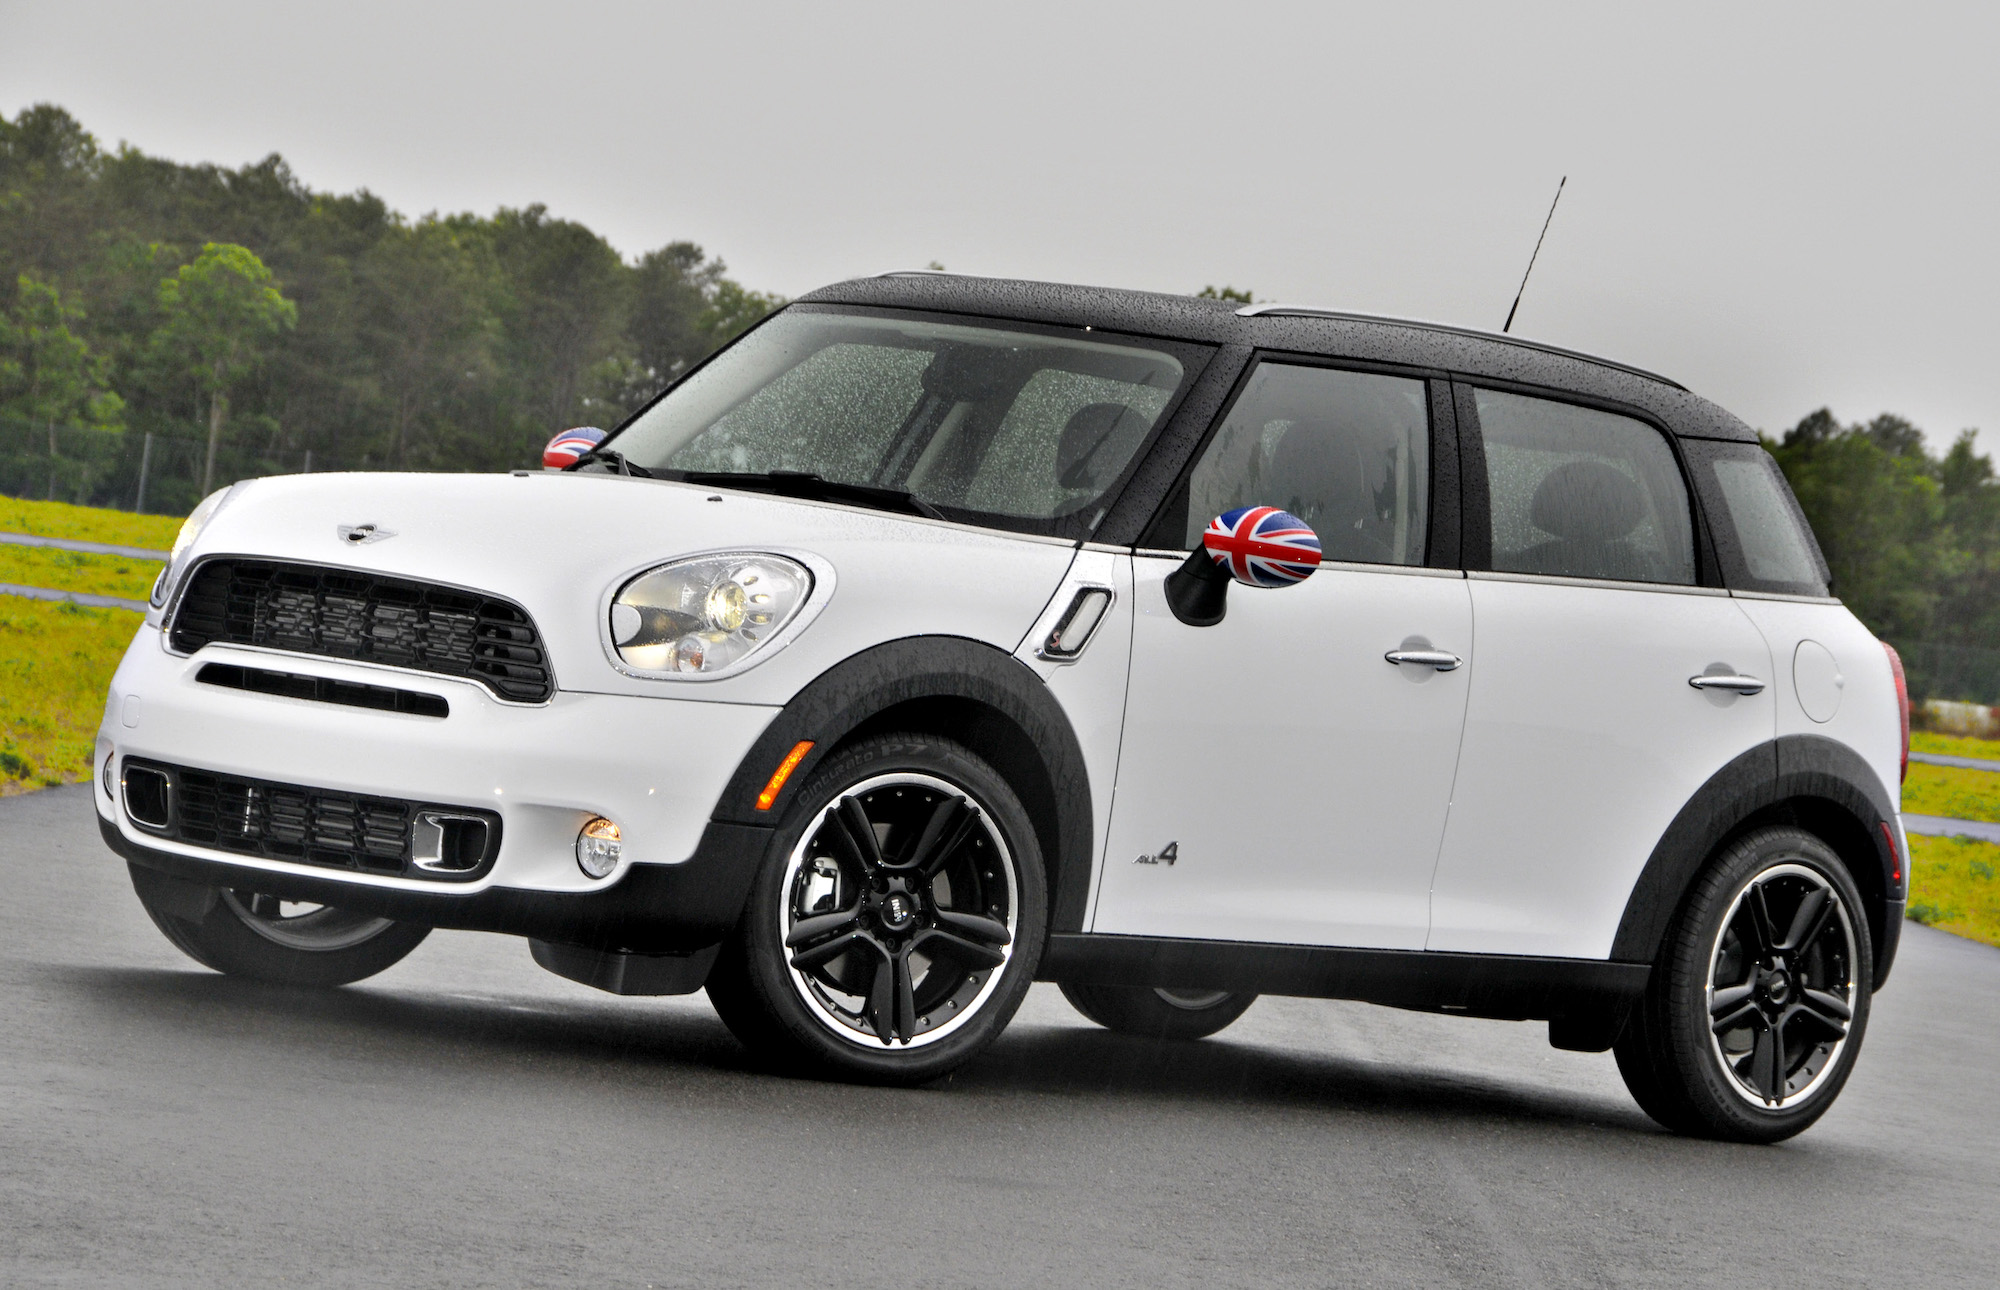 A white 2011 Mini Cooper Countryman subcompact SUV at New Jersey Motorsport Park in Millville, New Jersey, on Tuesday, May 11, 2010